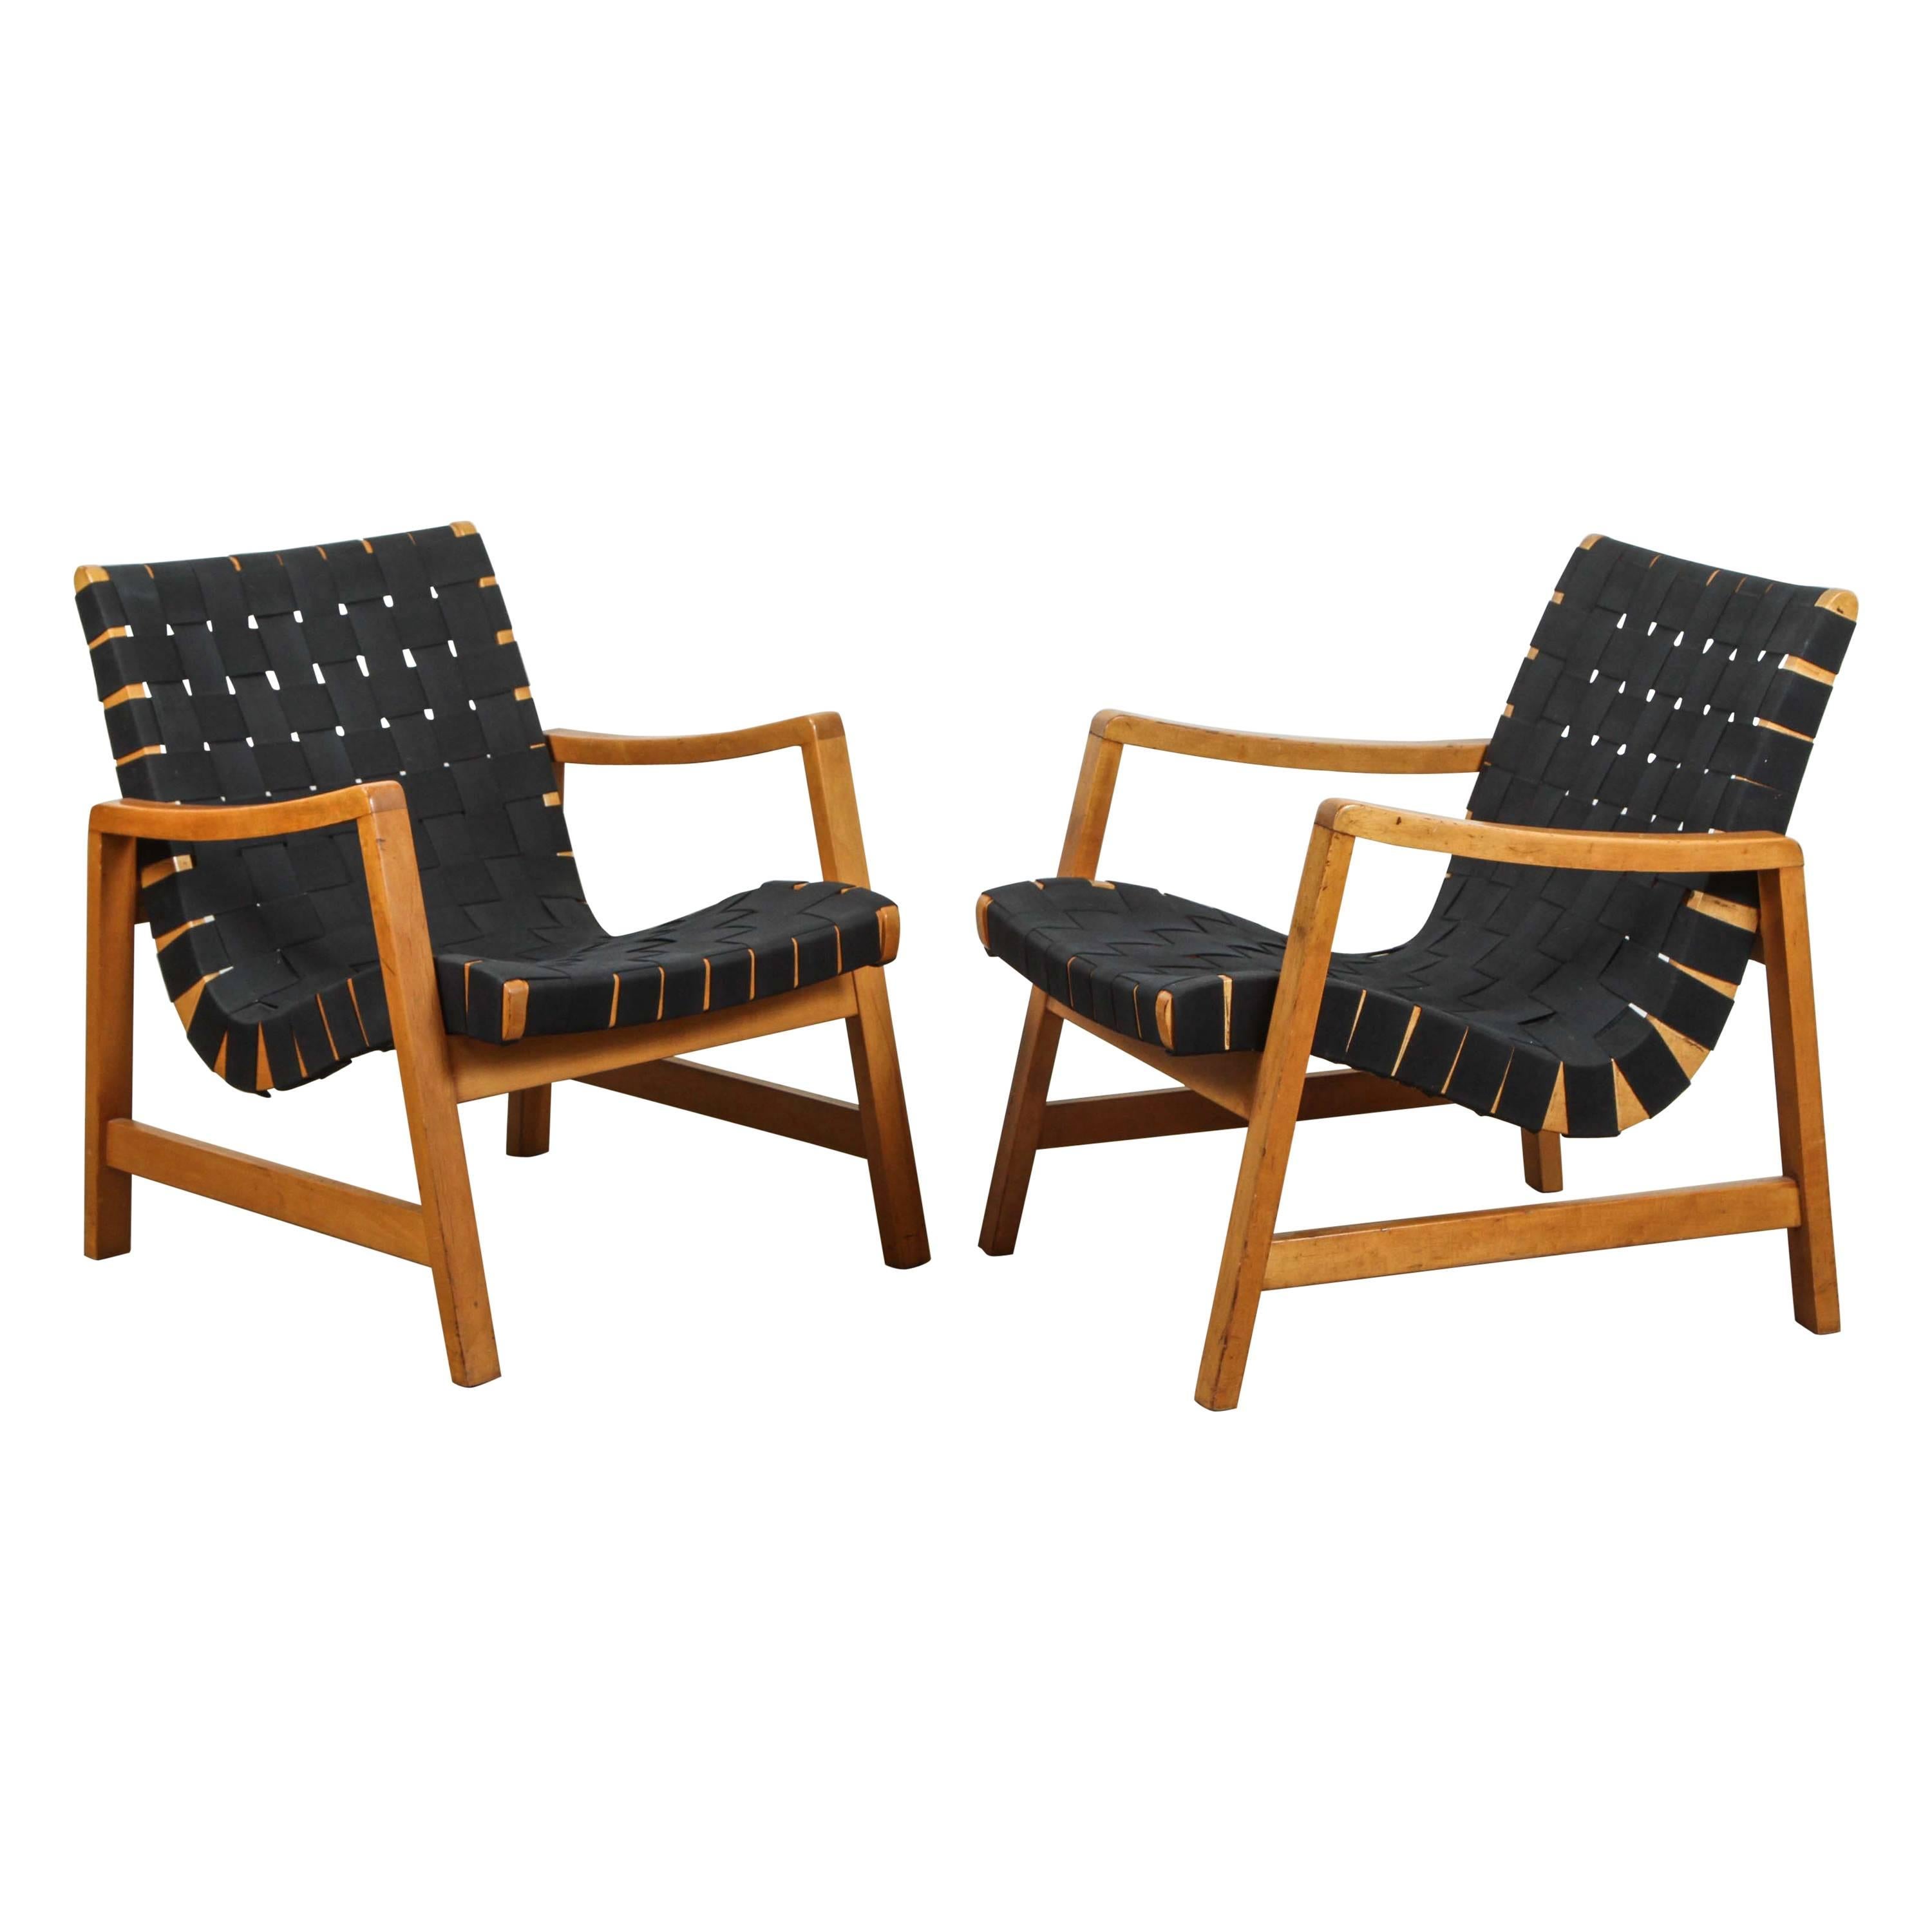 Pair of "Vostra" Armchairs by Jens Risom for Knoll